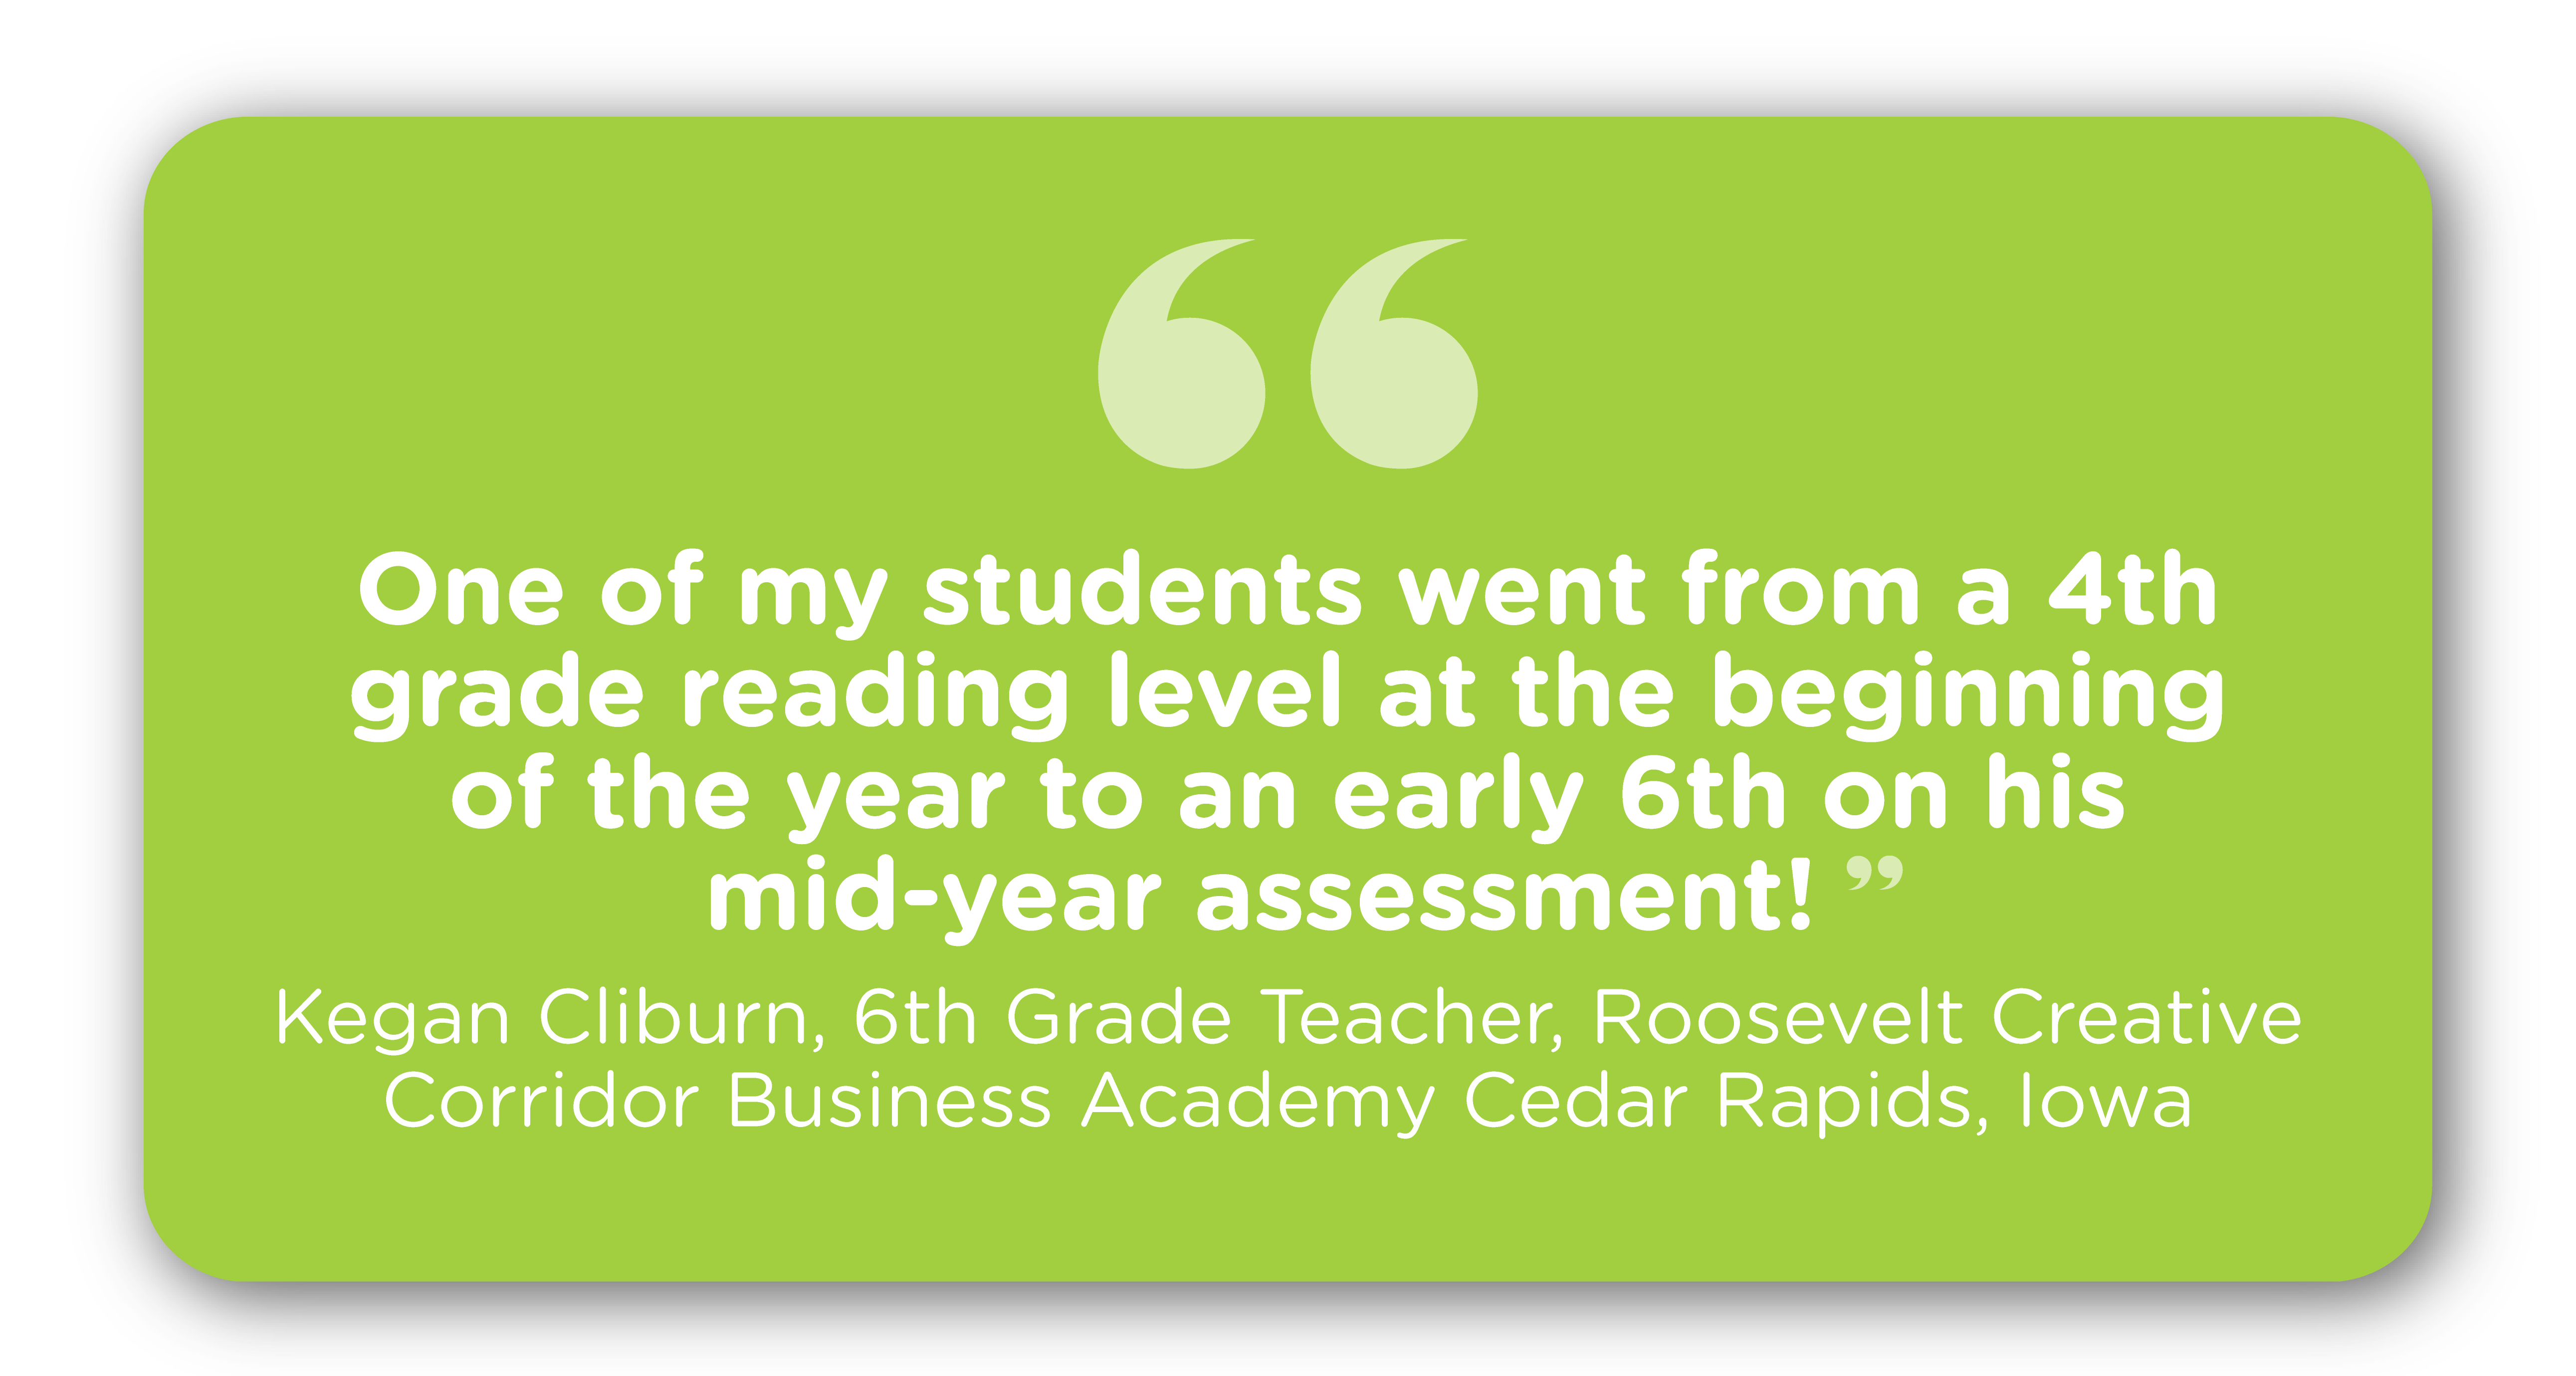 “One of my students went from a 4th grade reading level at the beginning of the year to an early 6th on his mid-year assessment! Another student went up two grade levels as well! He is now at a 5th grade reading level according to iReady and he was super proud!” Kegan Cliburn, 6th Grade Teacher, Roosevelt Creative Corridor Business Academy Cedar Rapids, Iowa